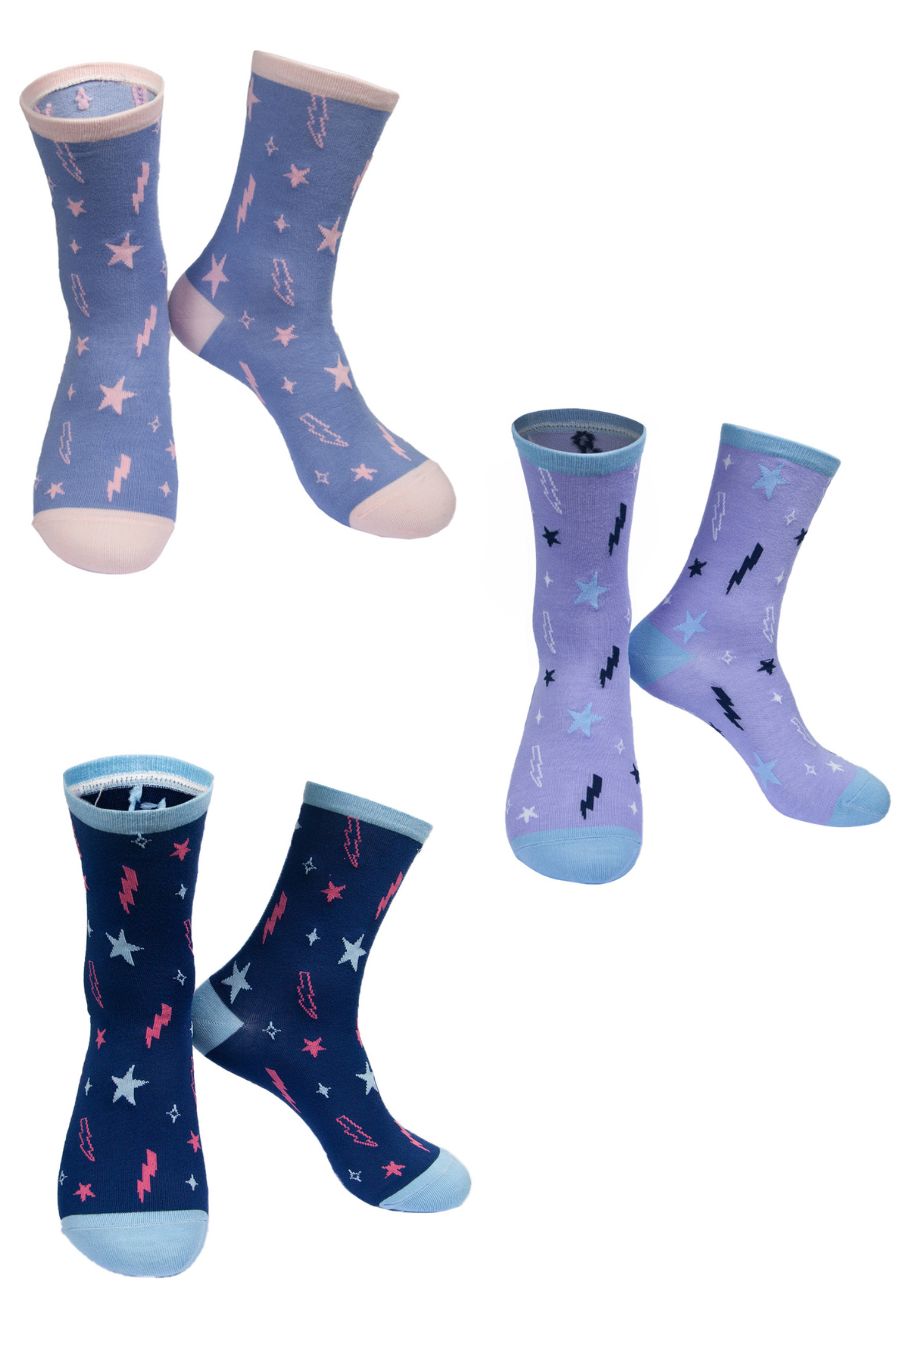 Three pairs of Womens Bamboo Socks Featuring Lightning Bolts and Stars